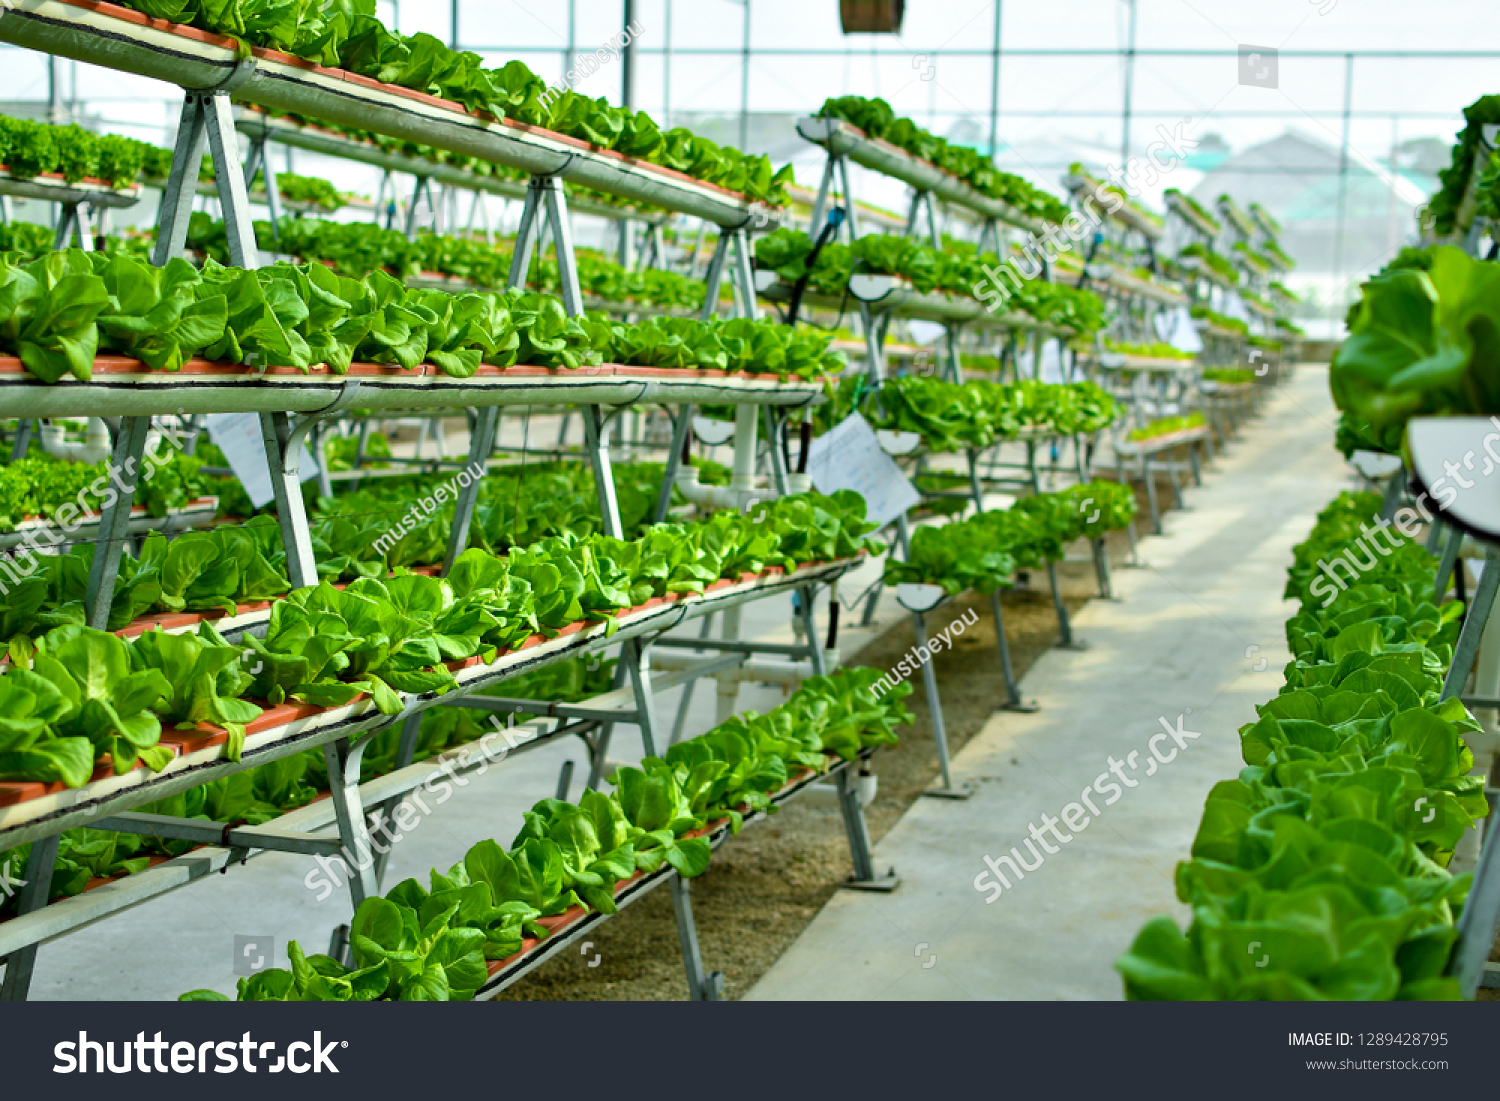 Hydroponic vertical farming systems #1289428795